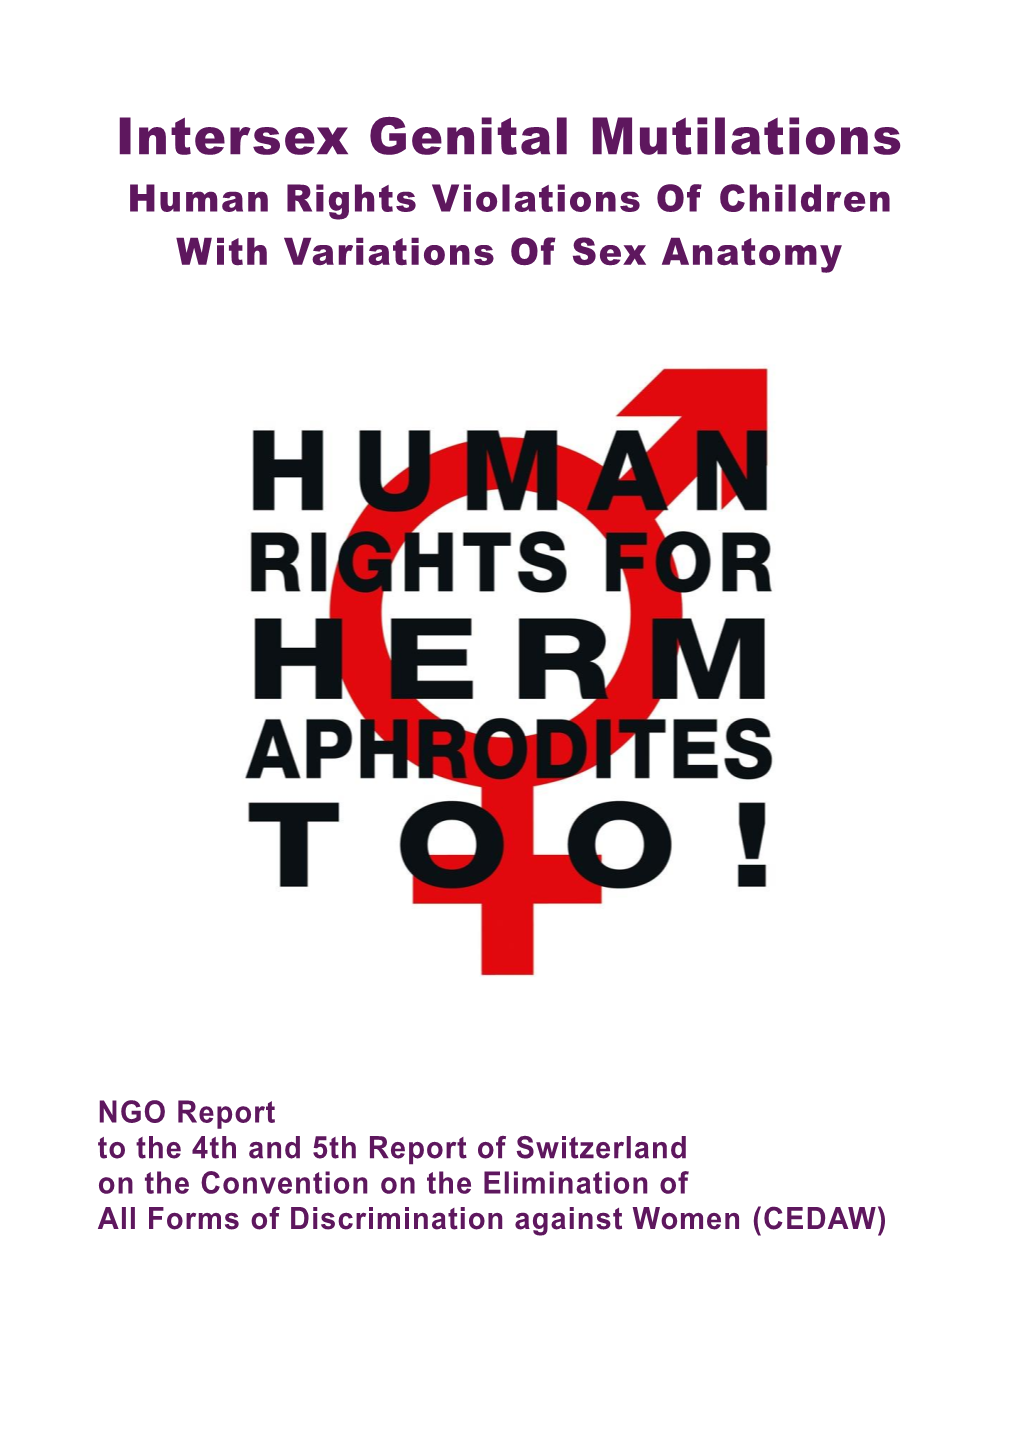 Intersex Genital Mutilations Human Rights Violations of Children with Variations of Sex Anatomy